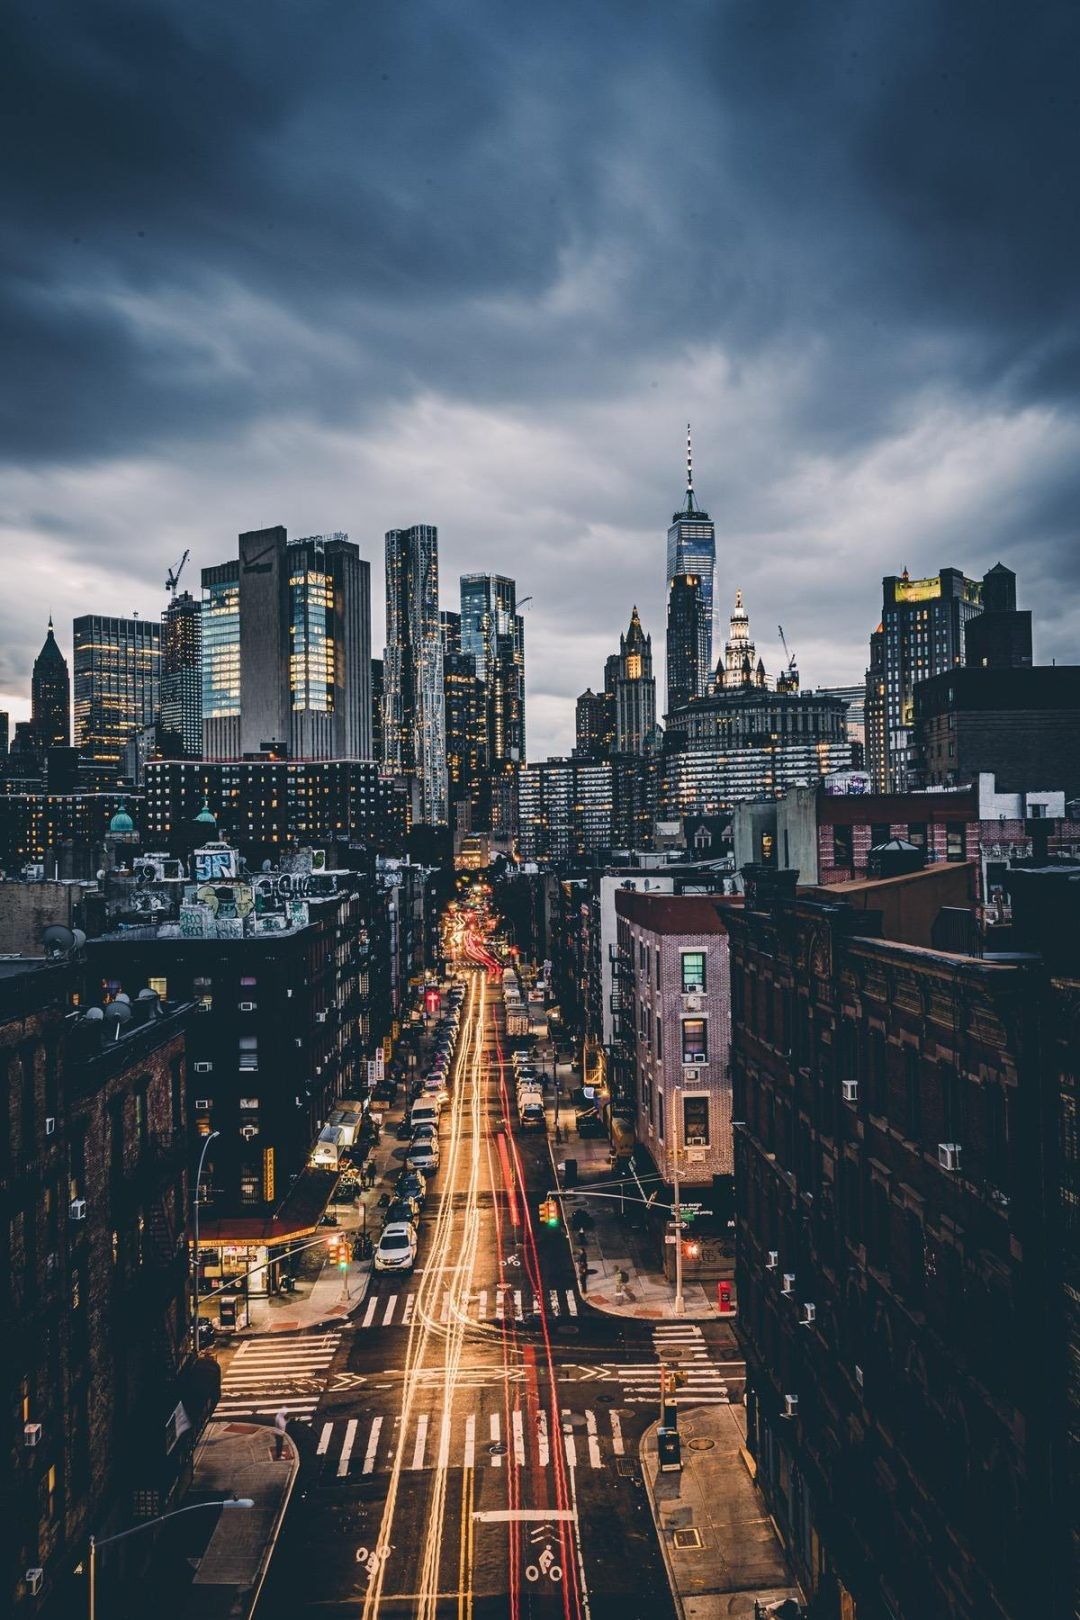 This image is of a cityscape at night with a very long exposure on the photo giving it a unique look. The street is filled with cars and the tall buildings have lights on in the windows. The sky is filled with dark clouds. - City, cityscape, New York, landscape, skyline